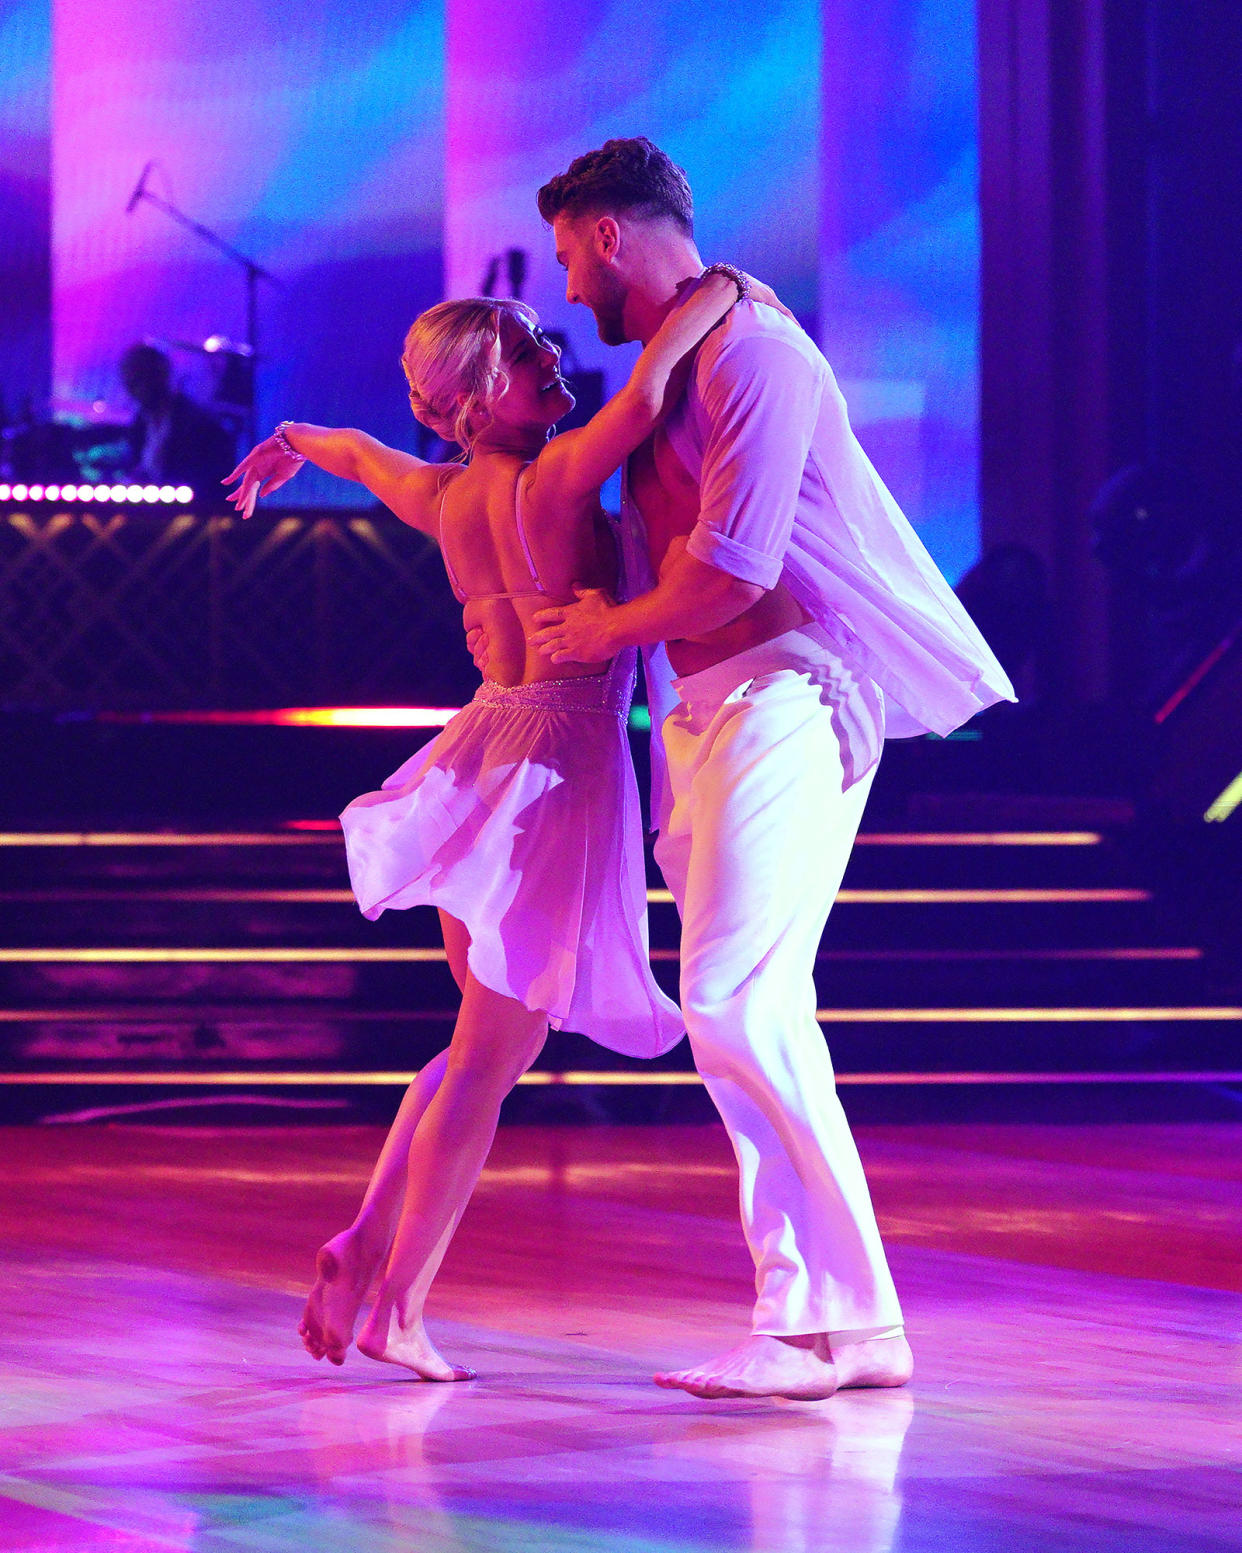 Harry Jowsey and Rylee Arnold are Excited to Dance After Hard Week 3